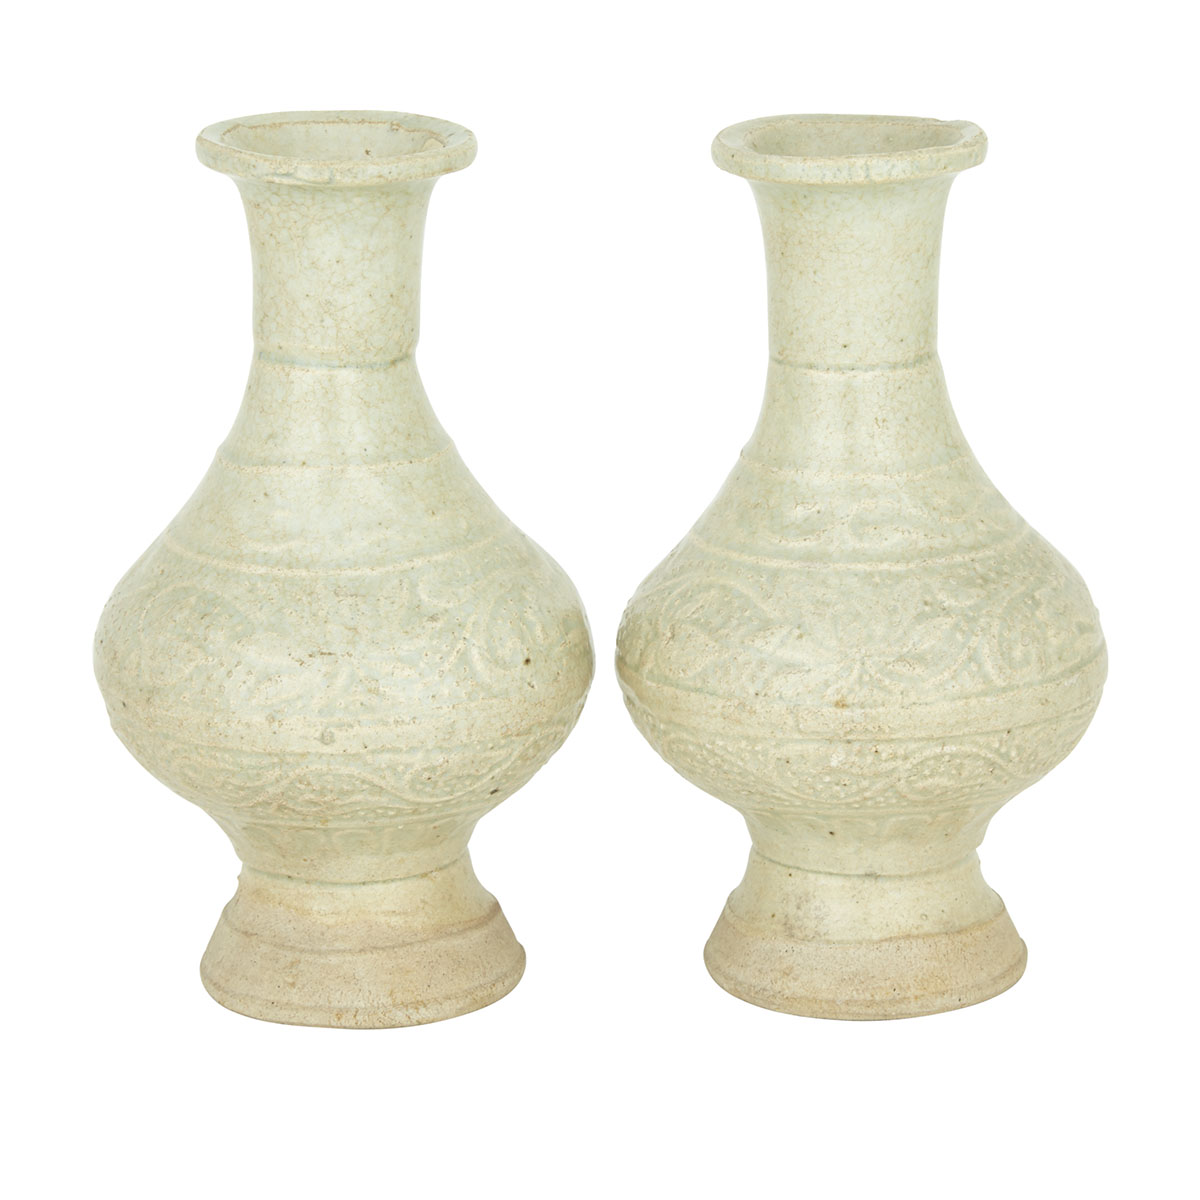 Pair of Yingqing Vases, Song Dynasty (960-1279)